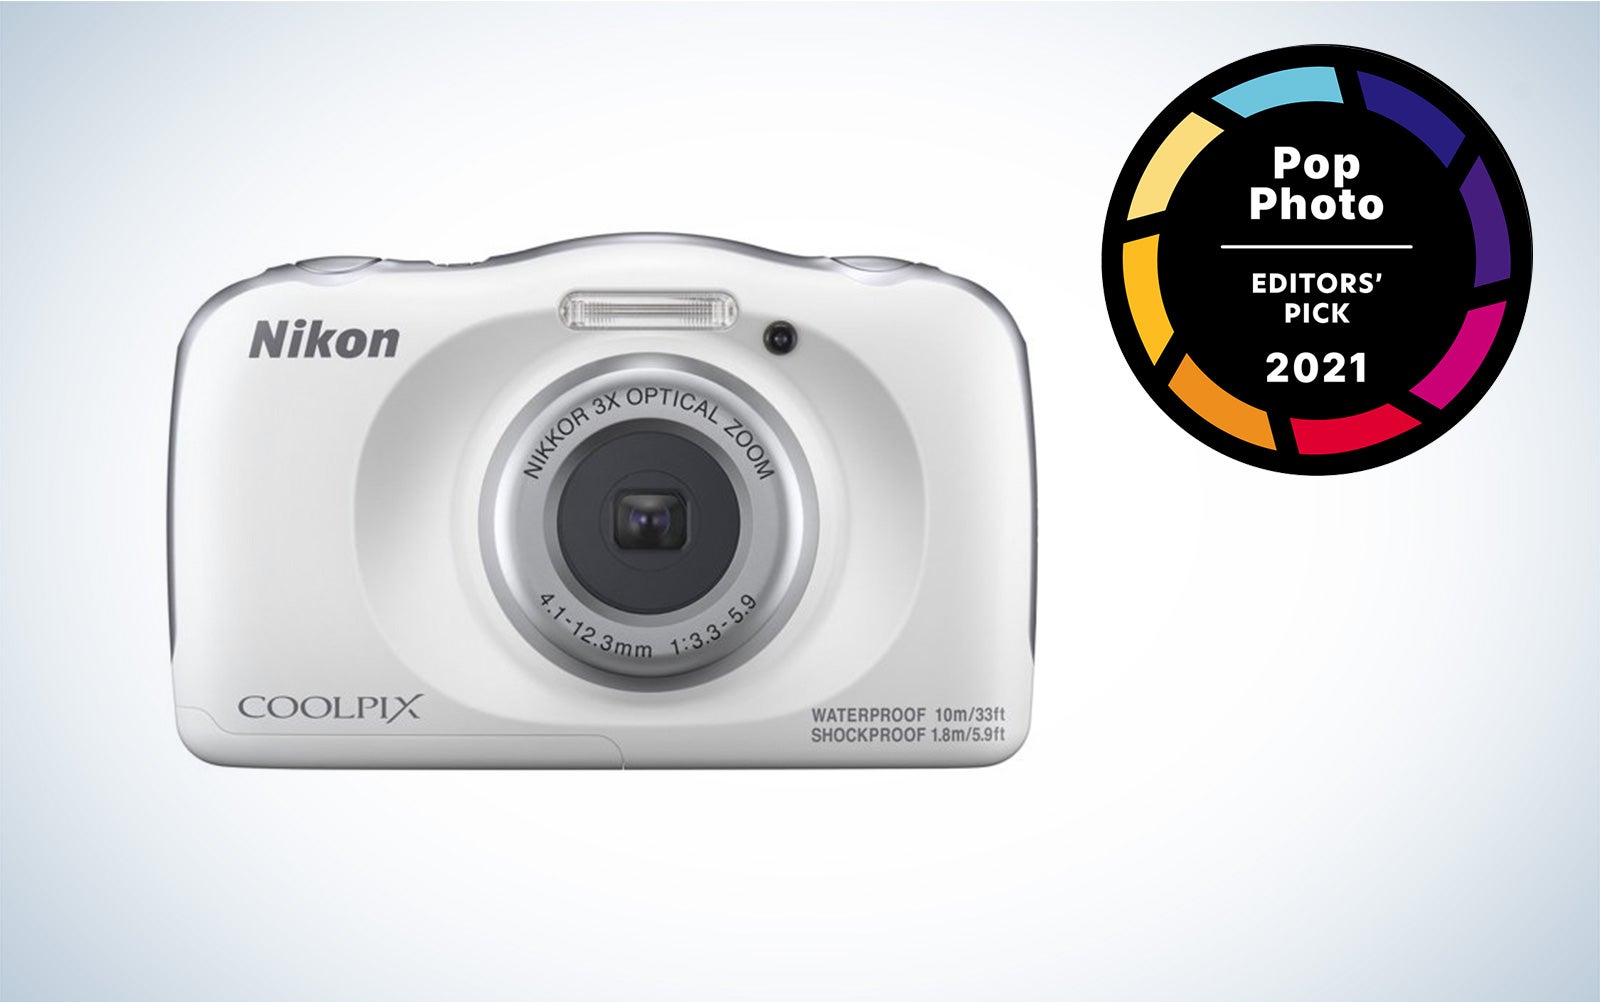 Nikon Coolpix W150 is the best camera for kids.